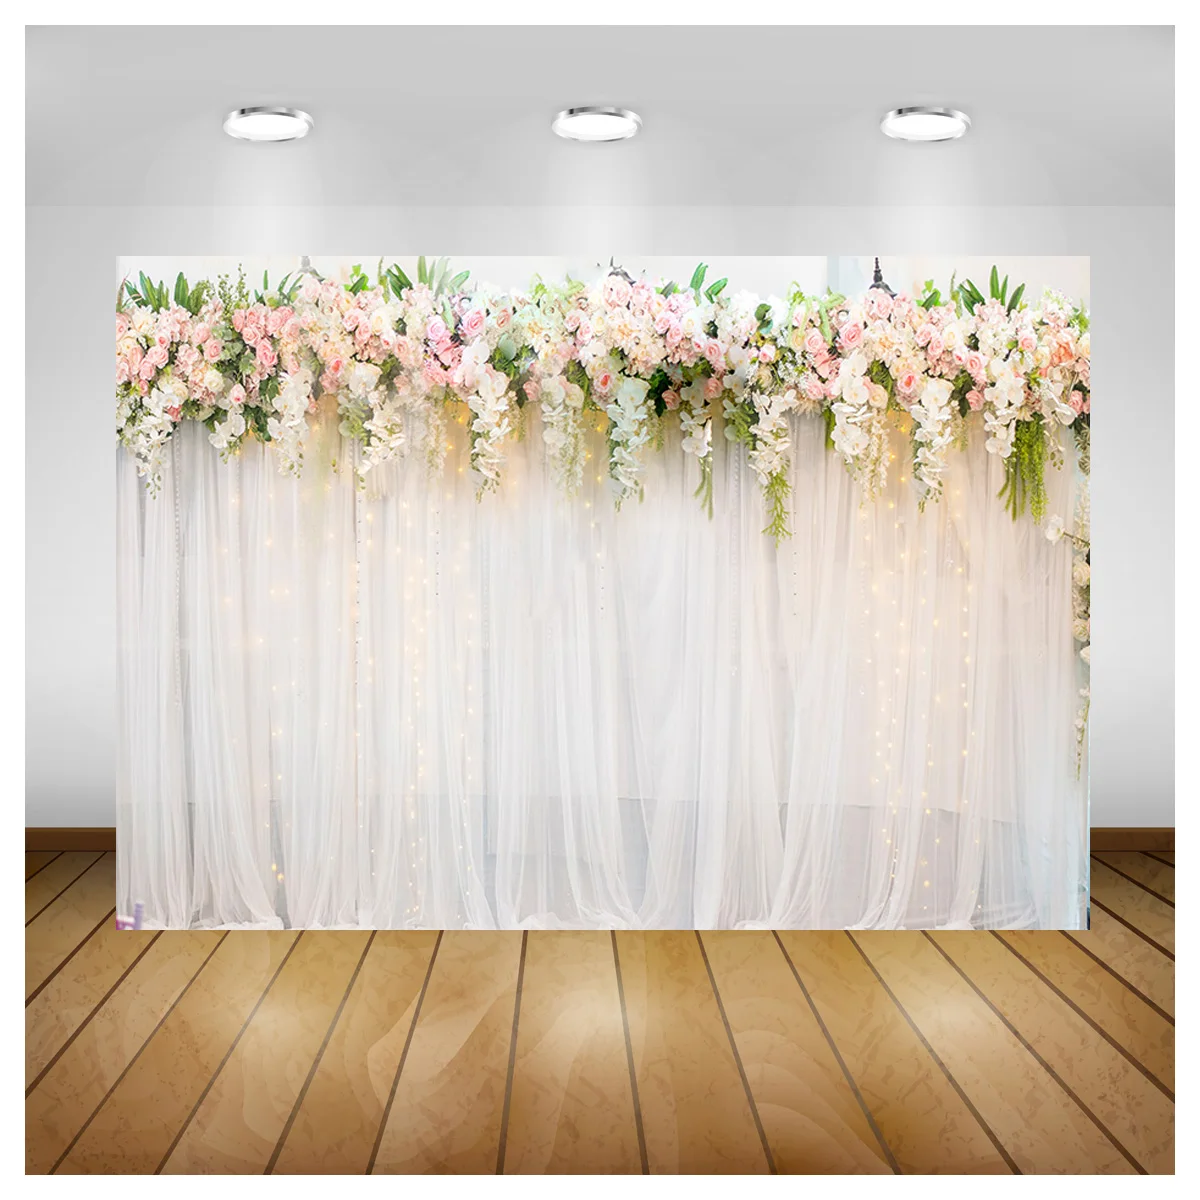 

Colorful Wooden Board Digital Printed Photography Backdrop Prop Flower Theme Photo Studio Background HH-02